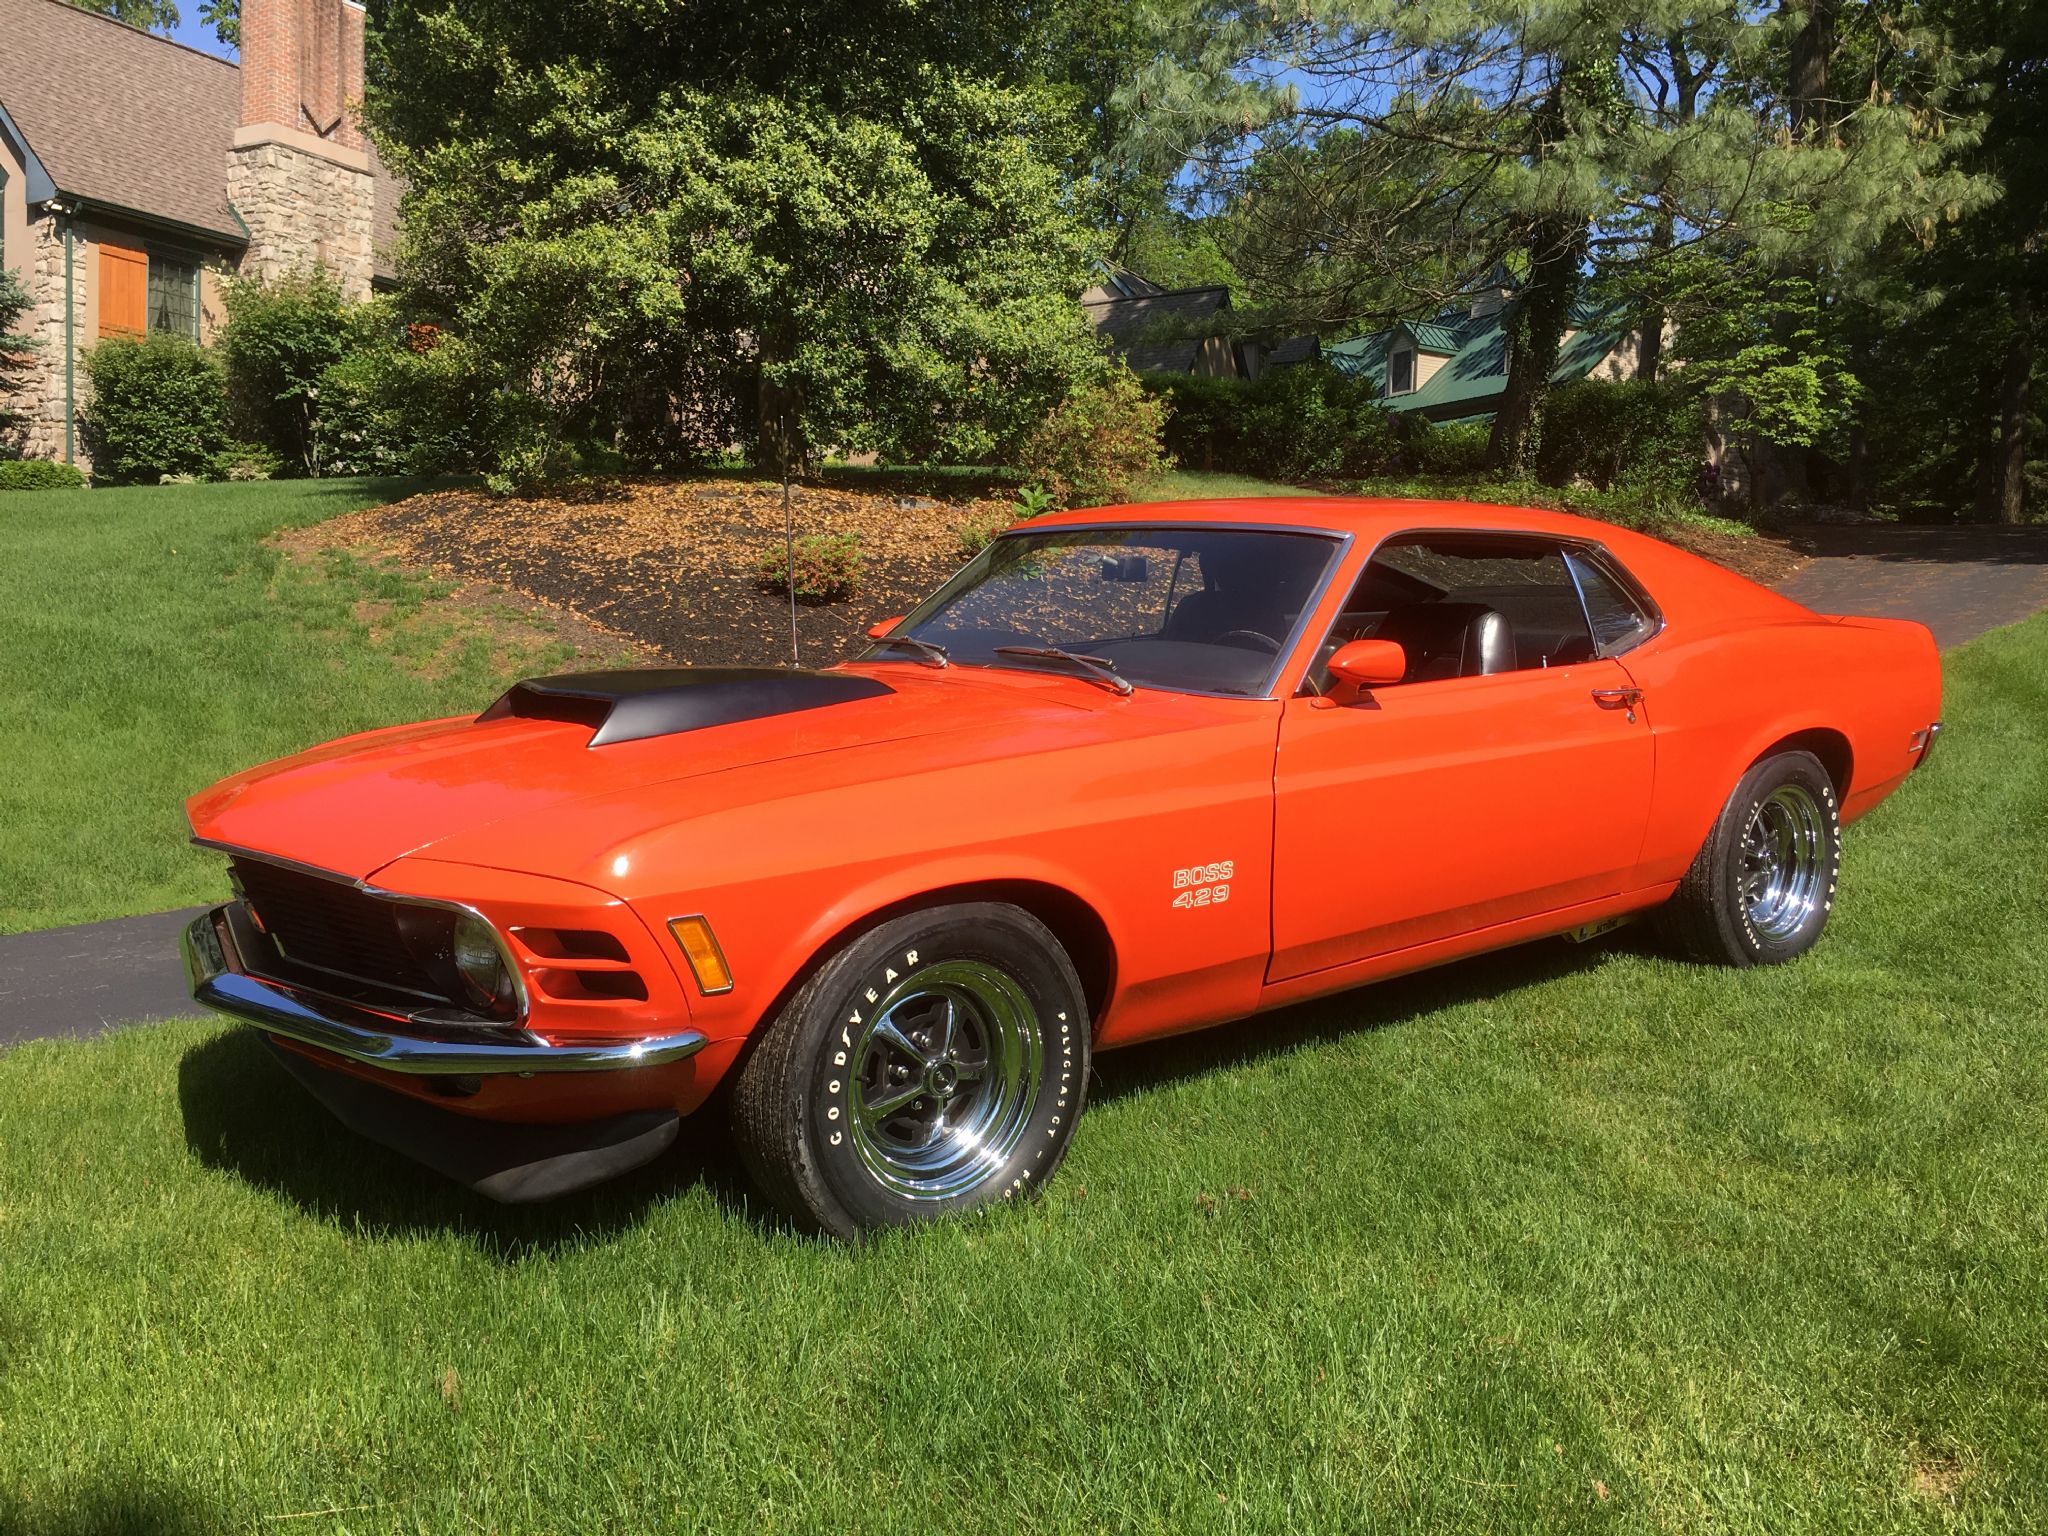  Ford Mustang Boss 429